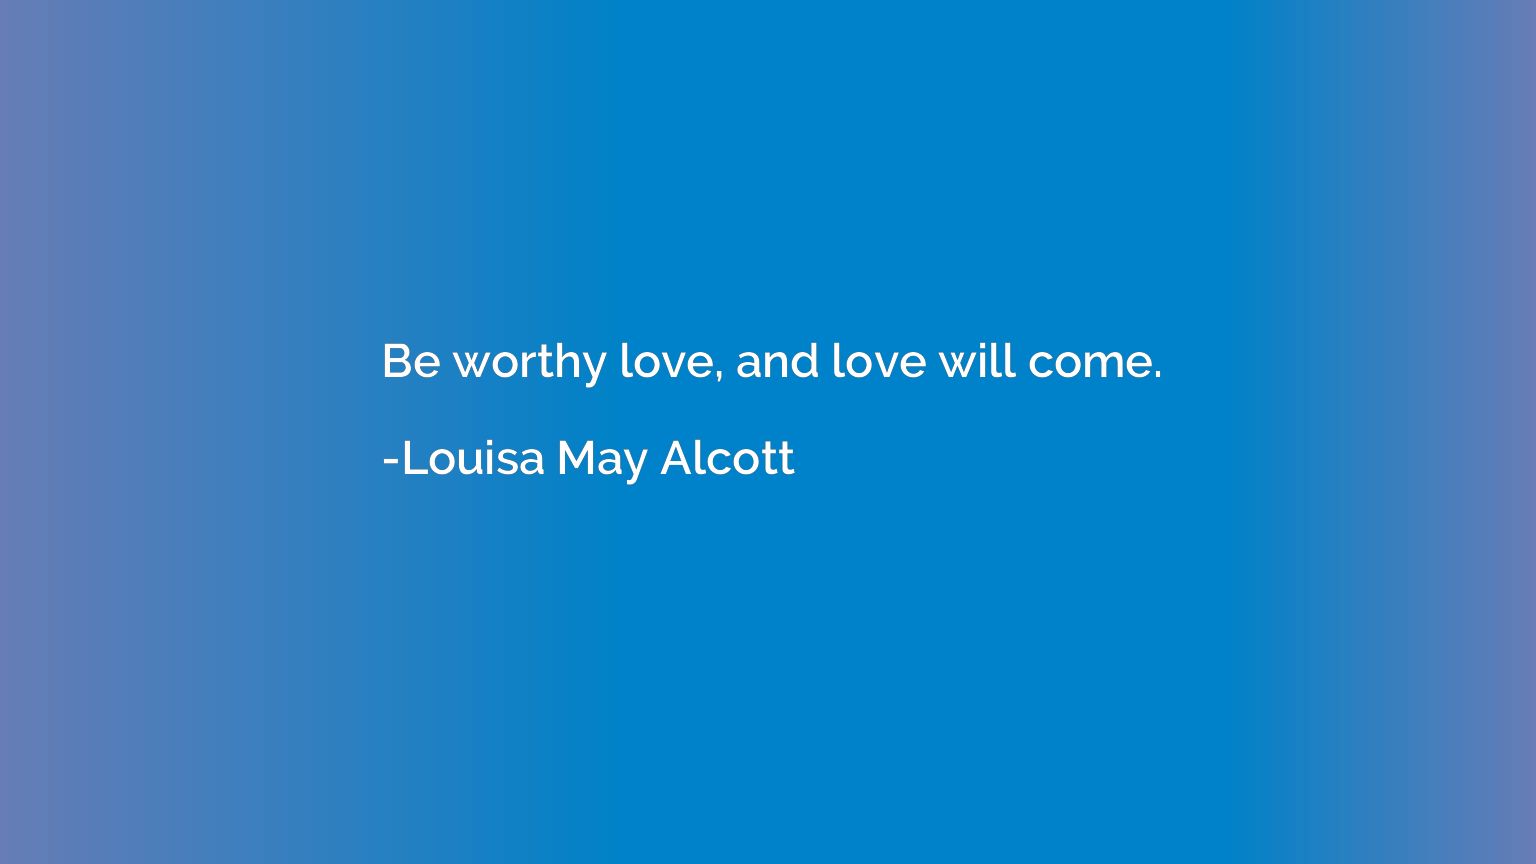 Be worthy love, and love will come.